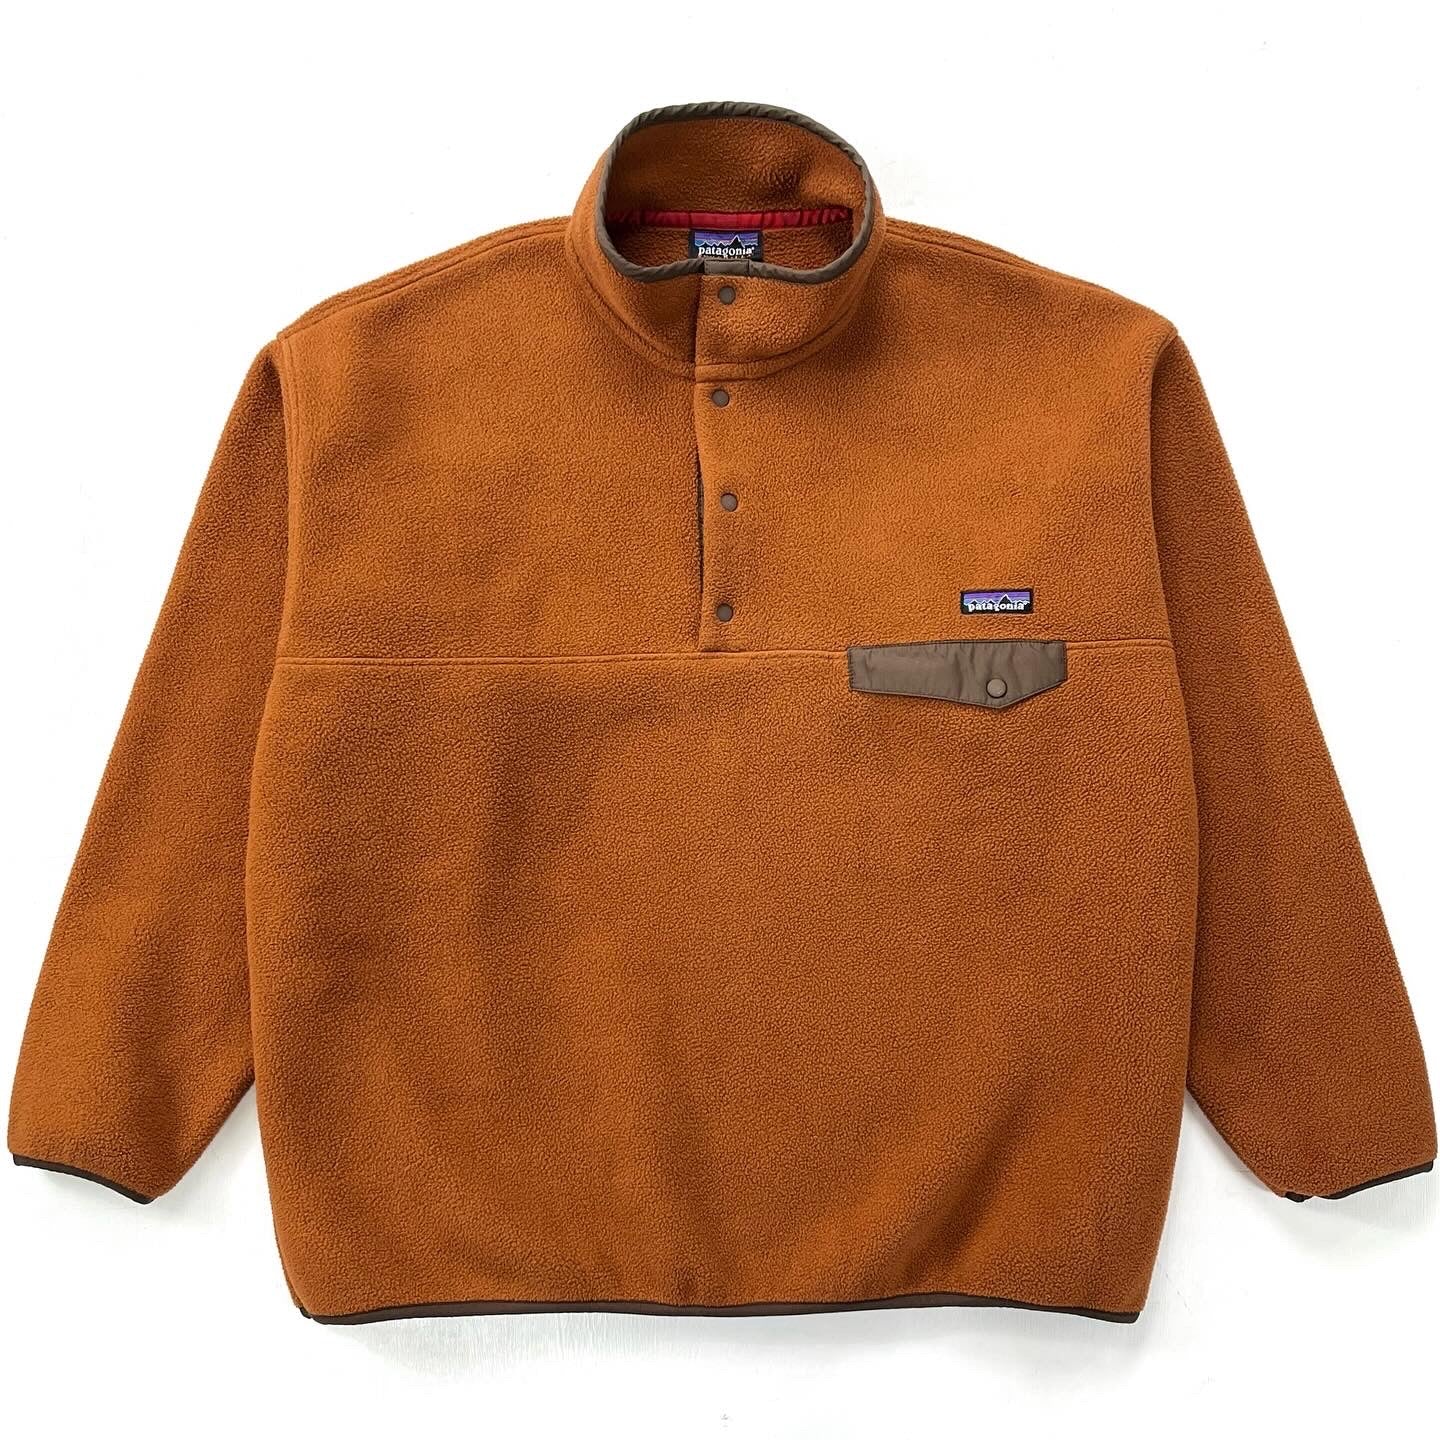 2009 Patagonia Synchilla Snap-T Fleece Pullover, Rustic Brown (XL)